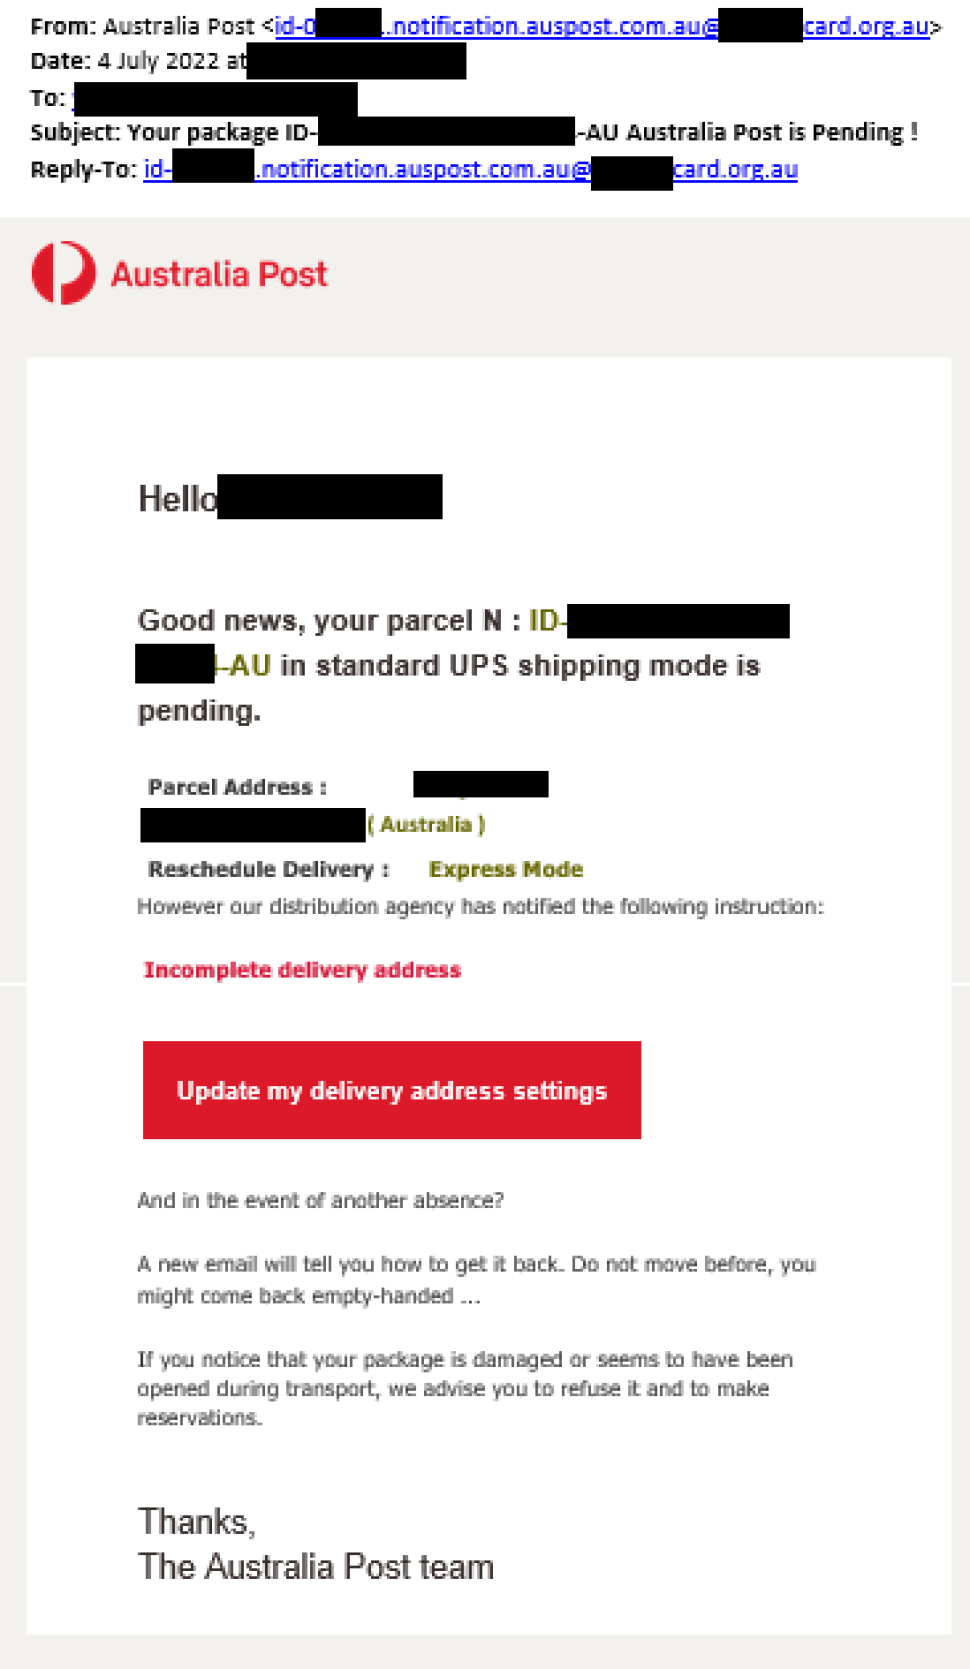 An email is sent with sender name as ‘Australia Post’ and an email address showing ‘notification.auspost.com.au. The other parts of the email address are masked out.

The subject of the Email reads ‘ Your package ID-<reference masked out>-AU Australia Post is Pending!

the message has the Australia Post logo at top and reads as below.

“ Hello <Name masked>, Good news, your parcel <ID masked> in a standard UPS shipping mode is pending.

Parcel address: <masked>

reschedule Delivery: Express Mode.

However the distribution agency has notified the following instructions. 
<In Bold Red> Incomplete delivery address”

There is a red button to click on with “Update my delivery address settings” written on it.